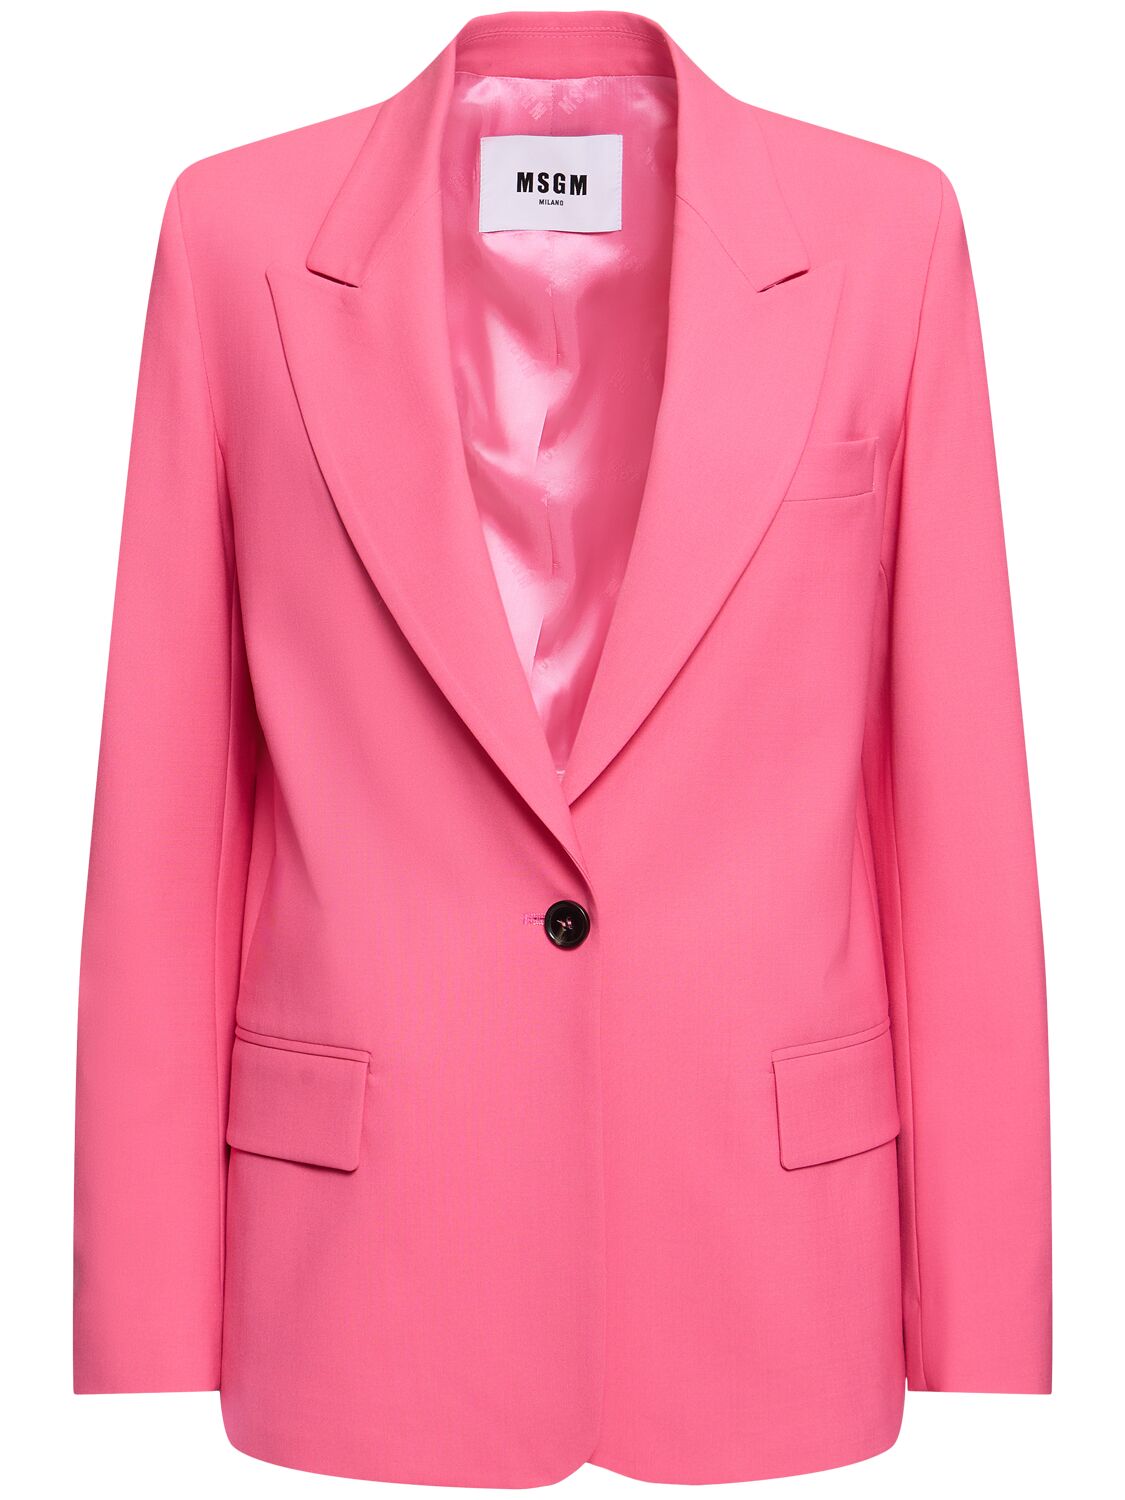 Msgm Stretch Wool Jacket In Pink